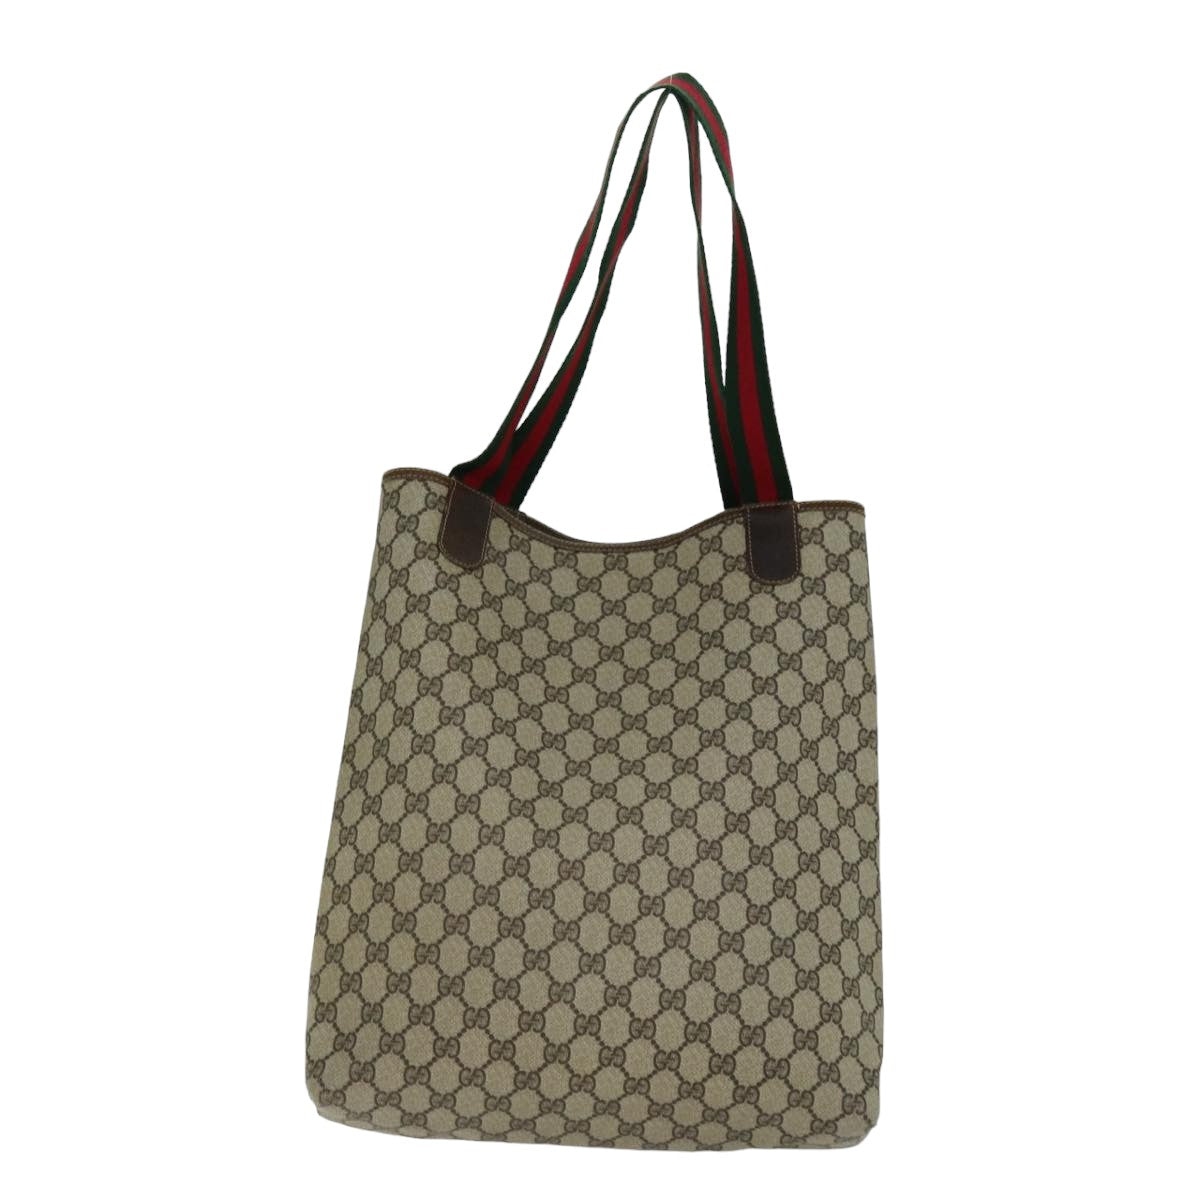 GUCCI GG Supreme Web Sherry Line Tote Bag PVC Beige Red 002 4487 39 Auth ep4289 - 0